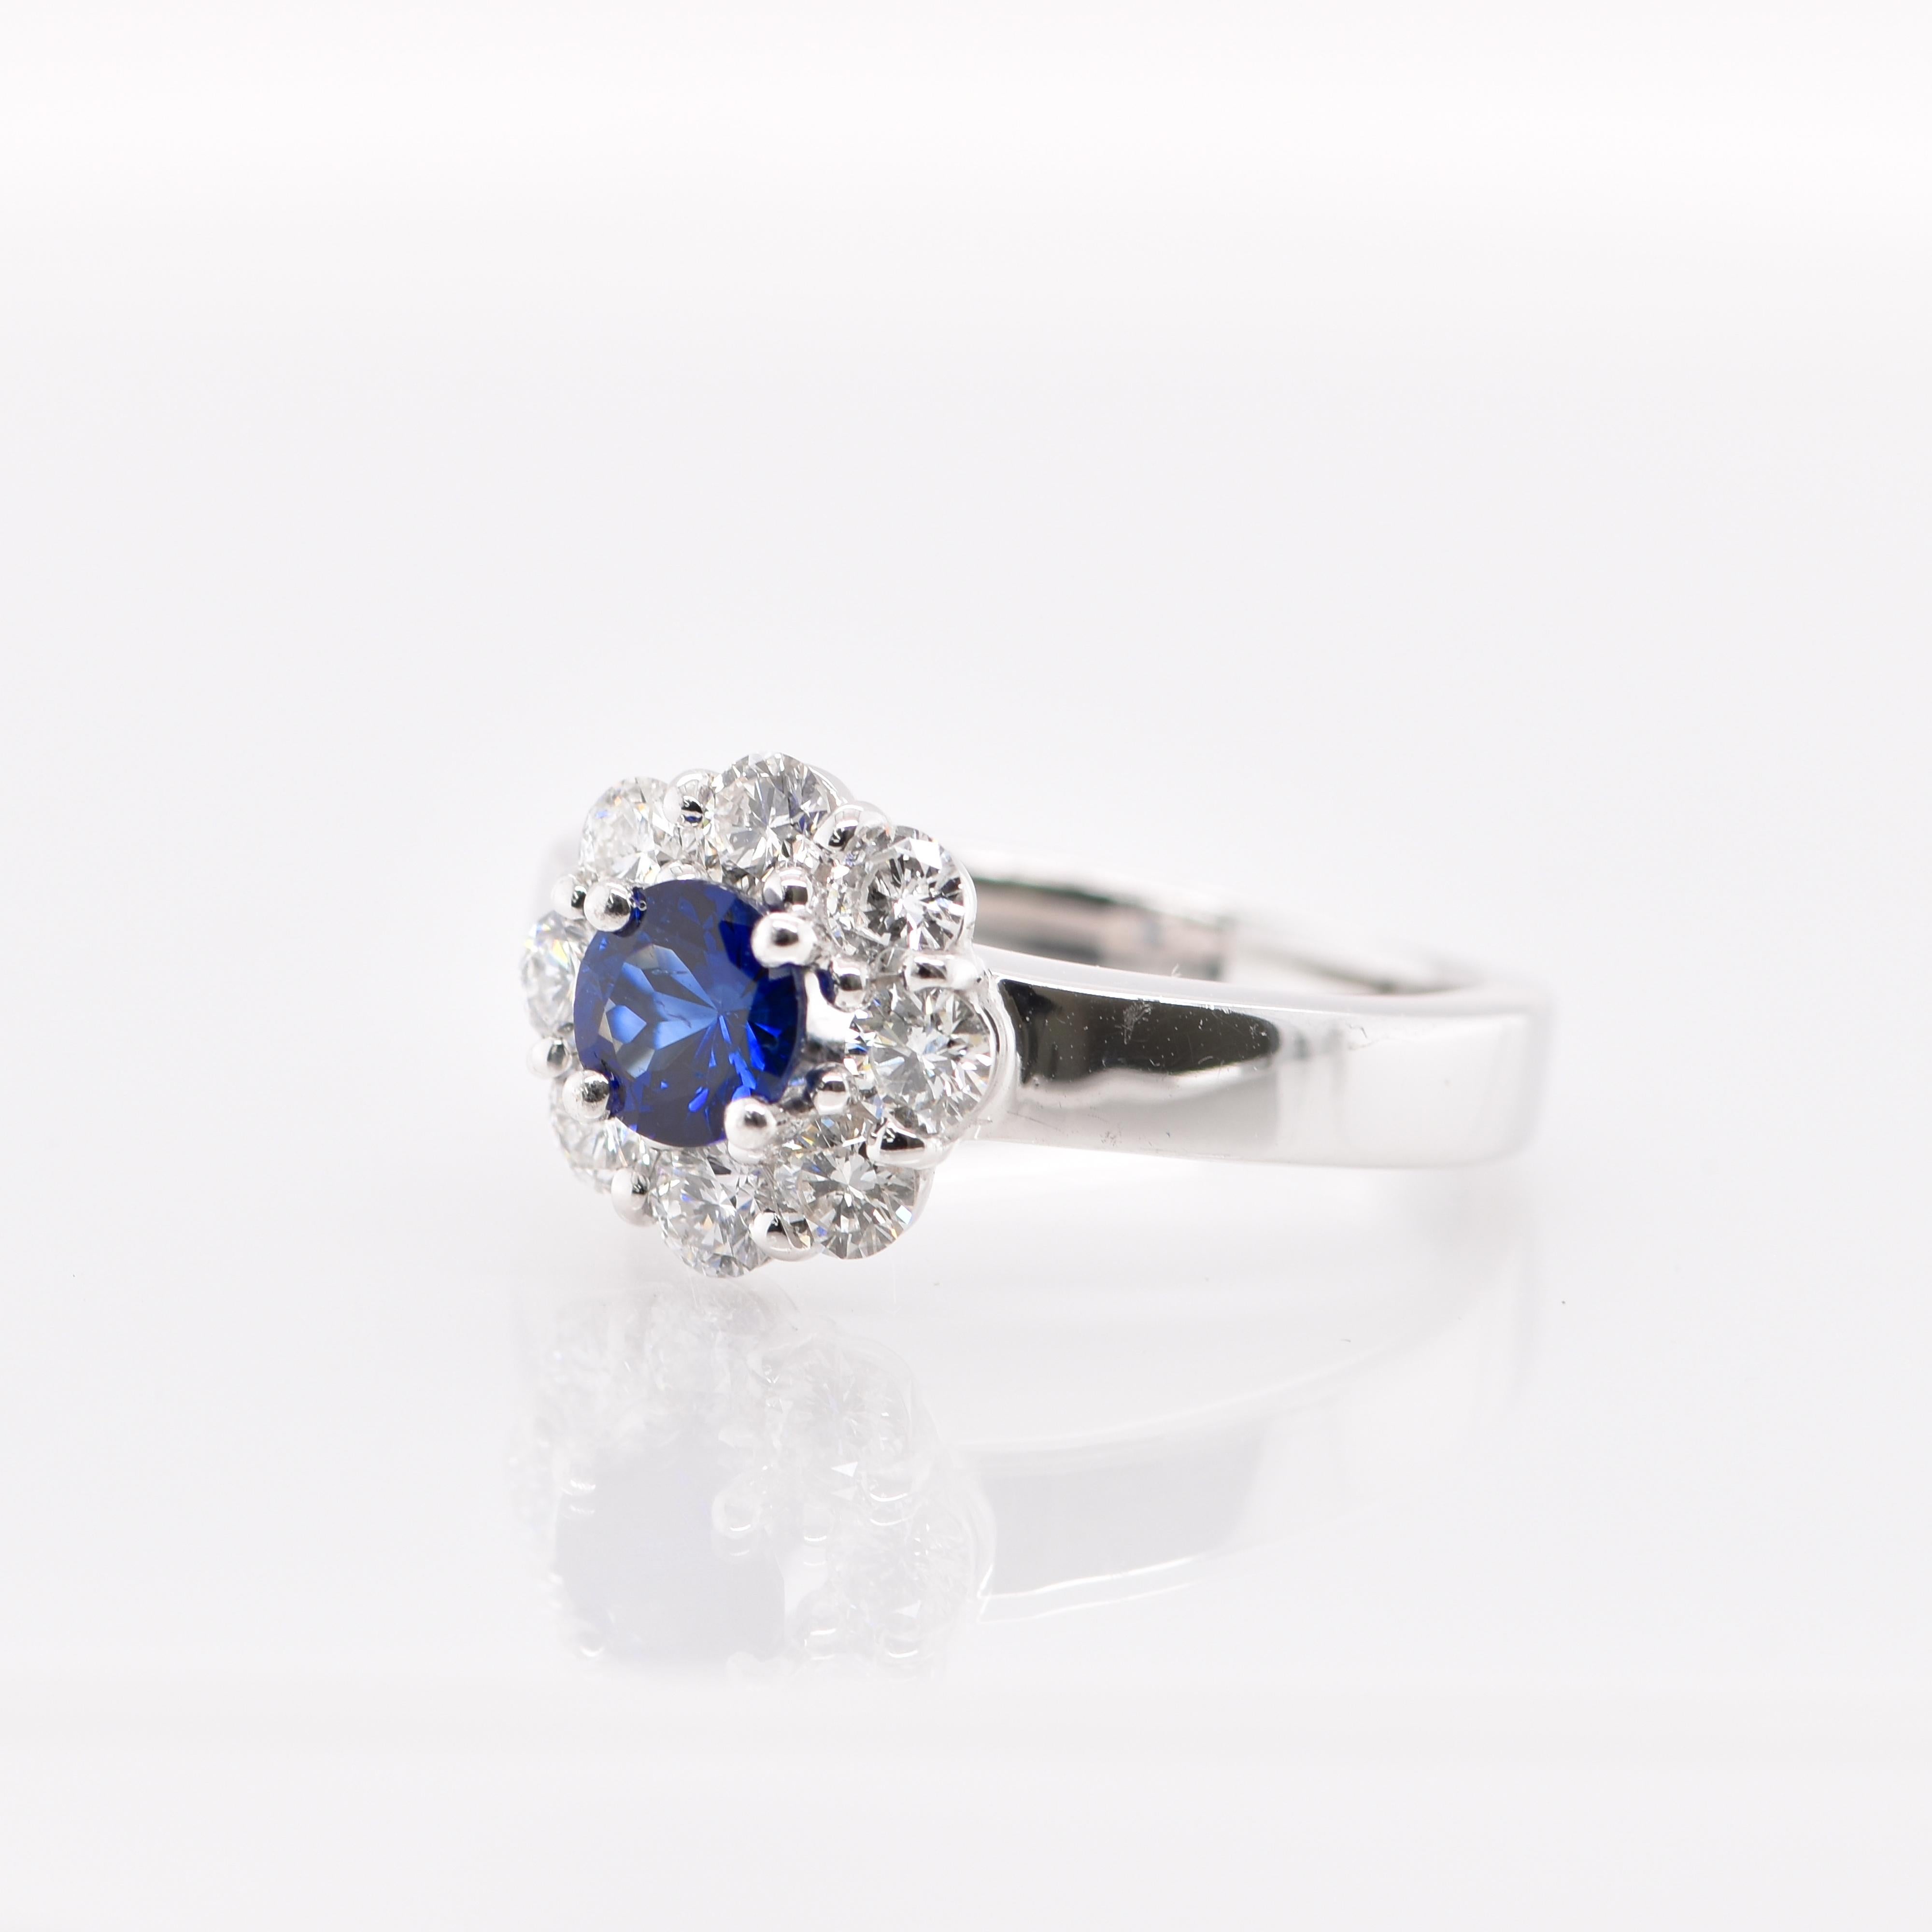 Round Cut 0.73 Carat Sapphire and Diamond Engagement Ring Set in 18 Karat White Gold For Sale